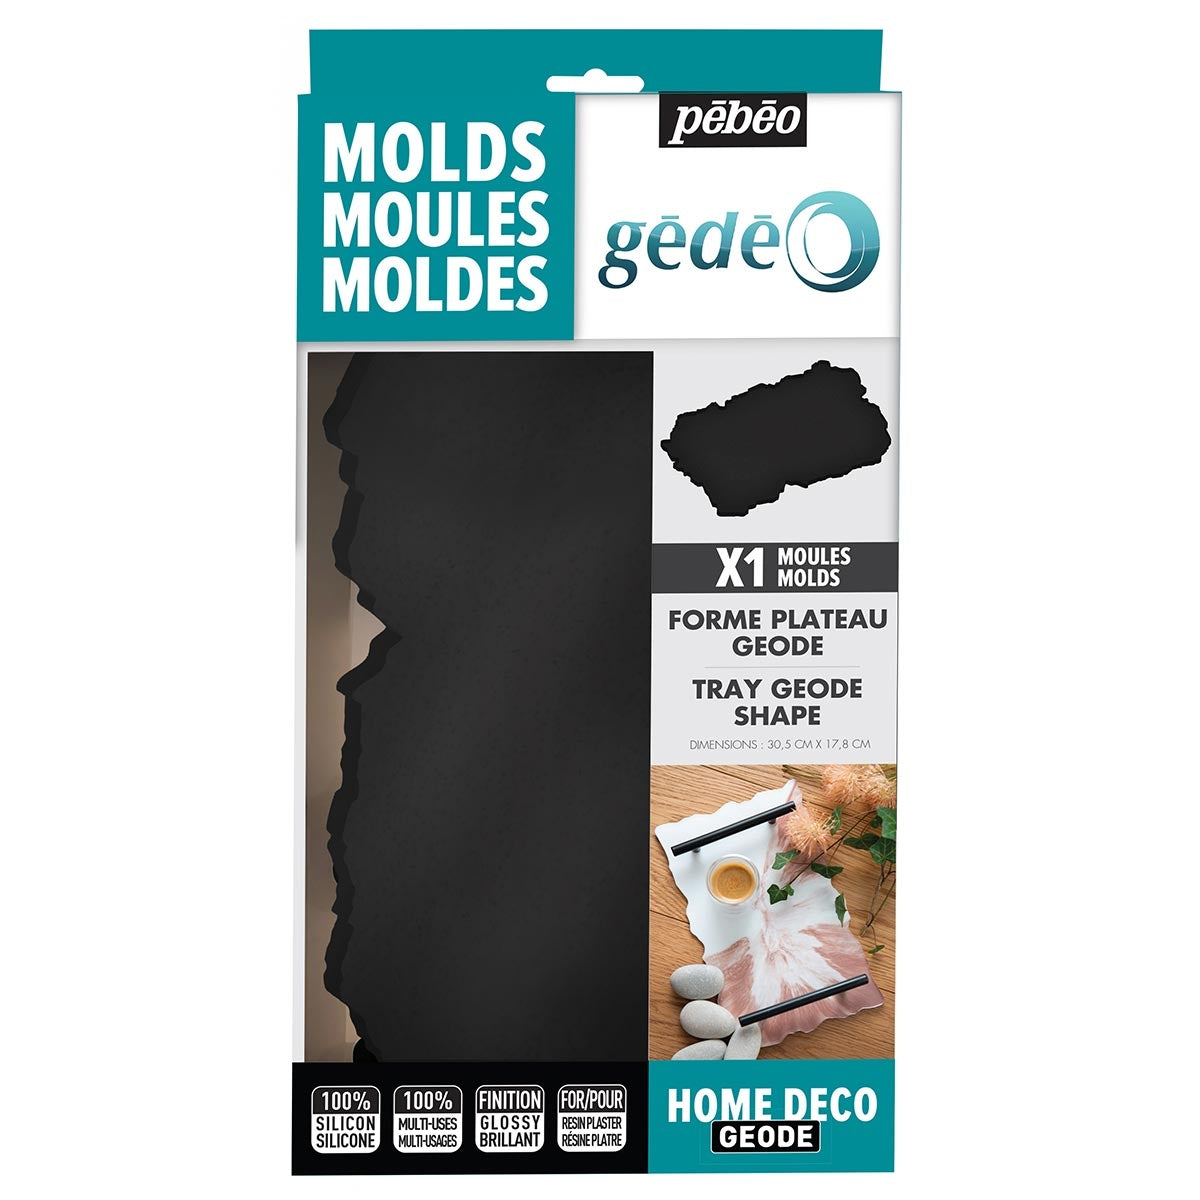 Pebeo - Gedeo - Silicone Mould Geode Tray Mould With Handles